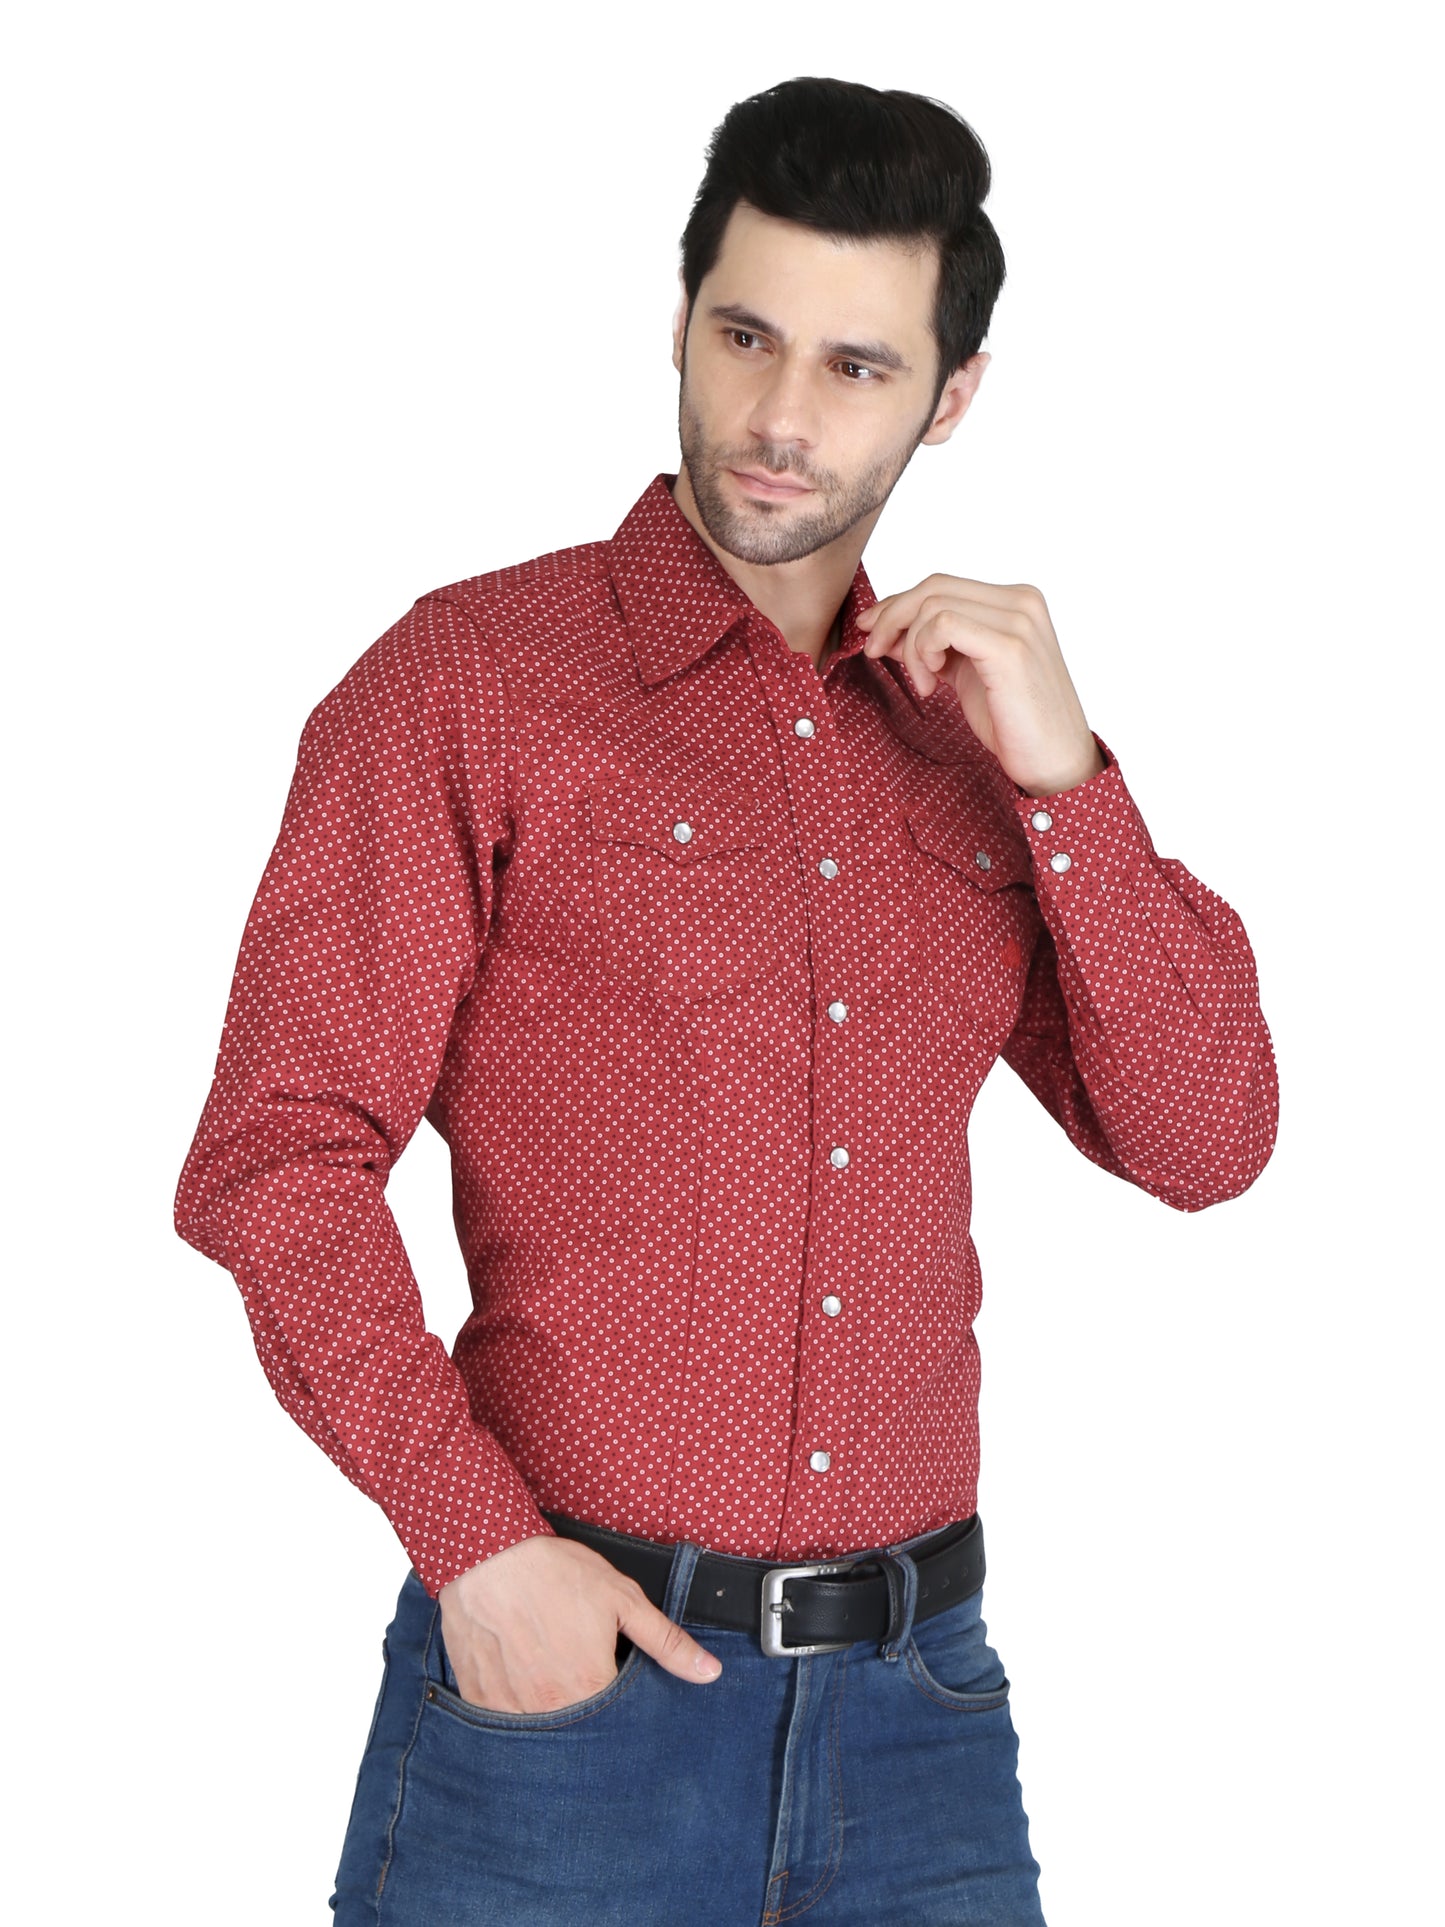 Forge Fr Men's Red Printed Long Sleeve Shirt